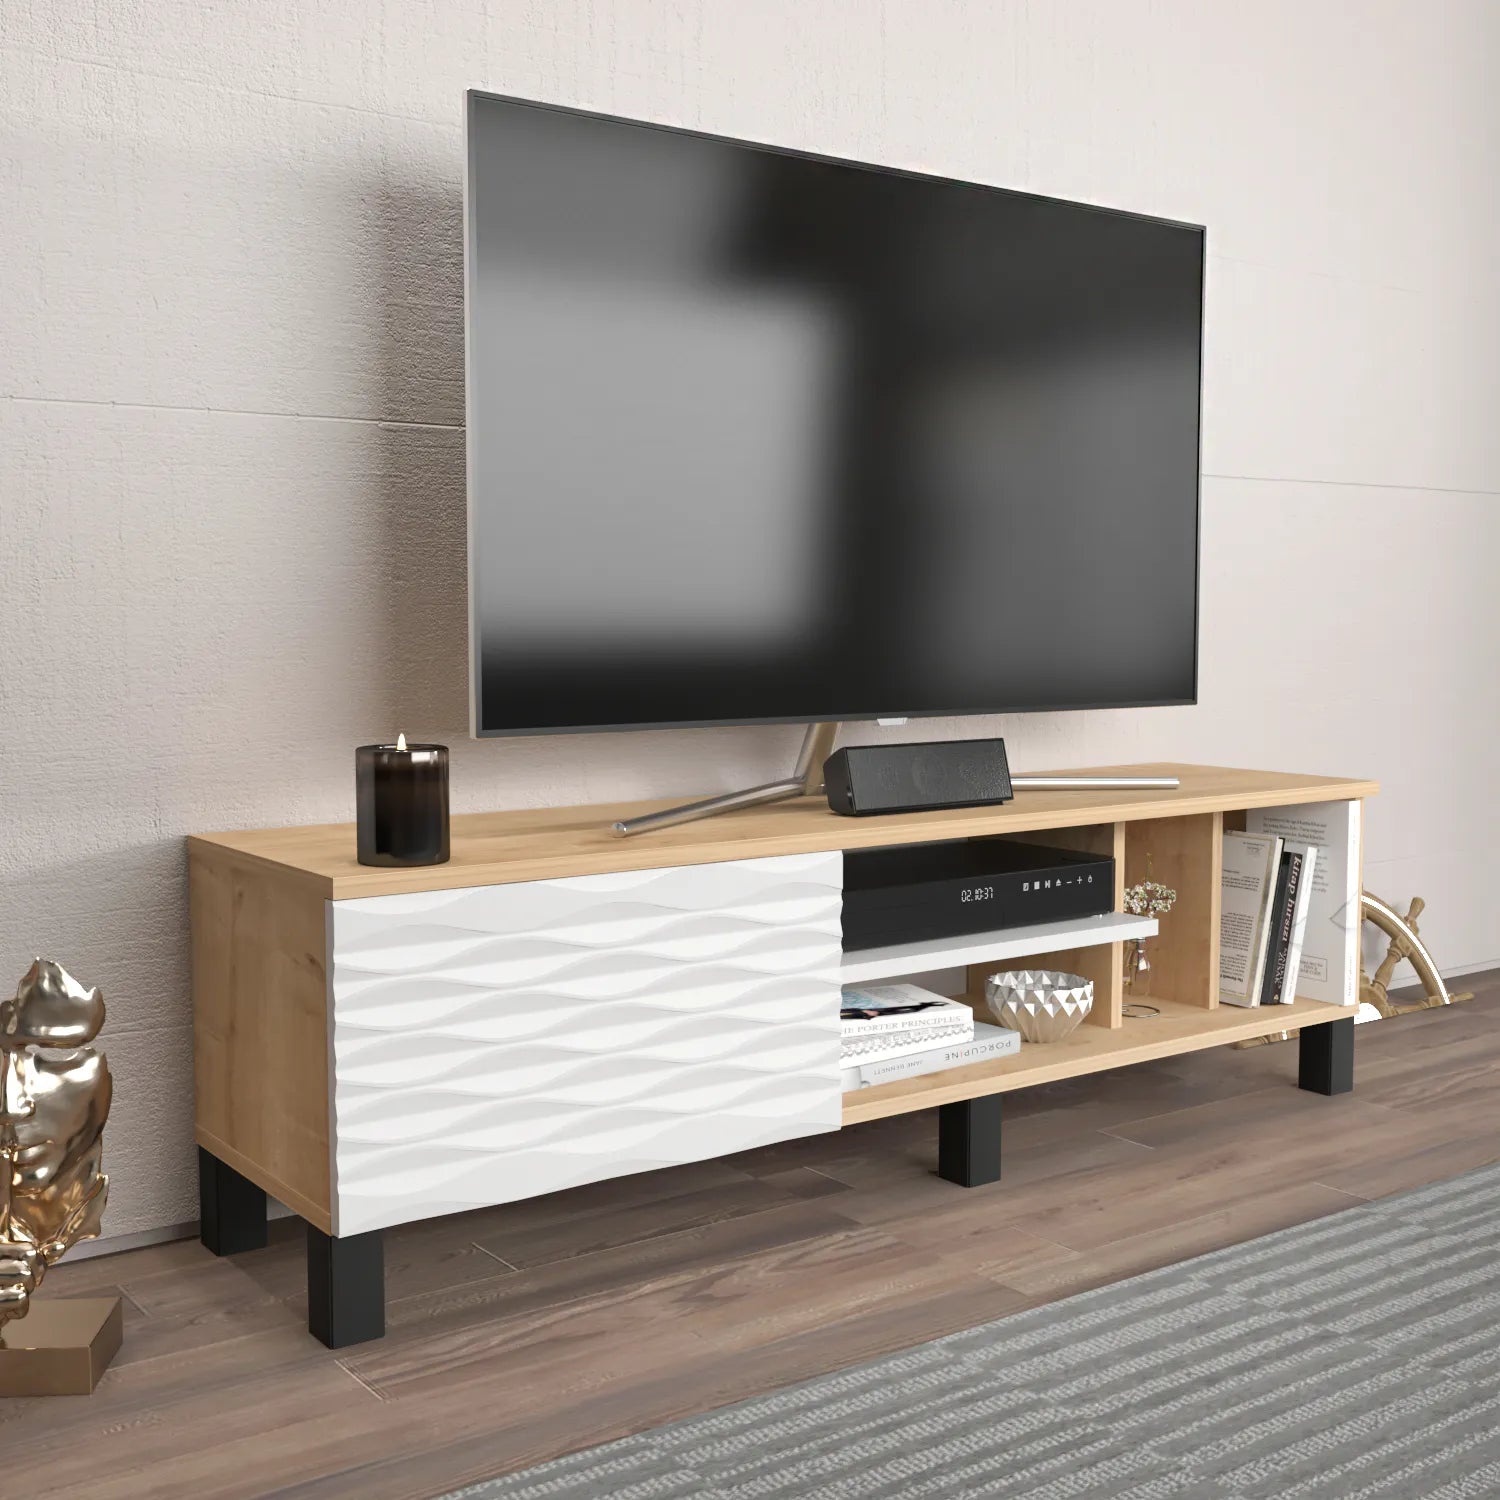 Olyo 55 inch Wide TV Stand Media Console for TVs up to 60 inch